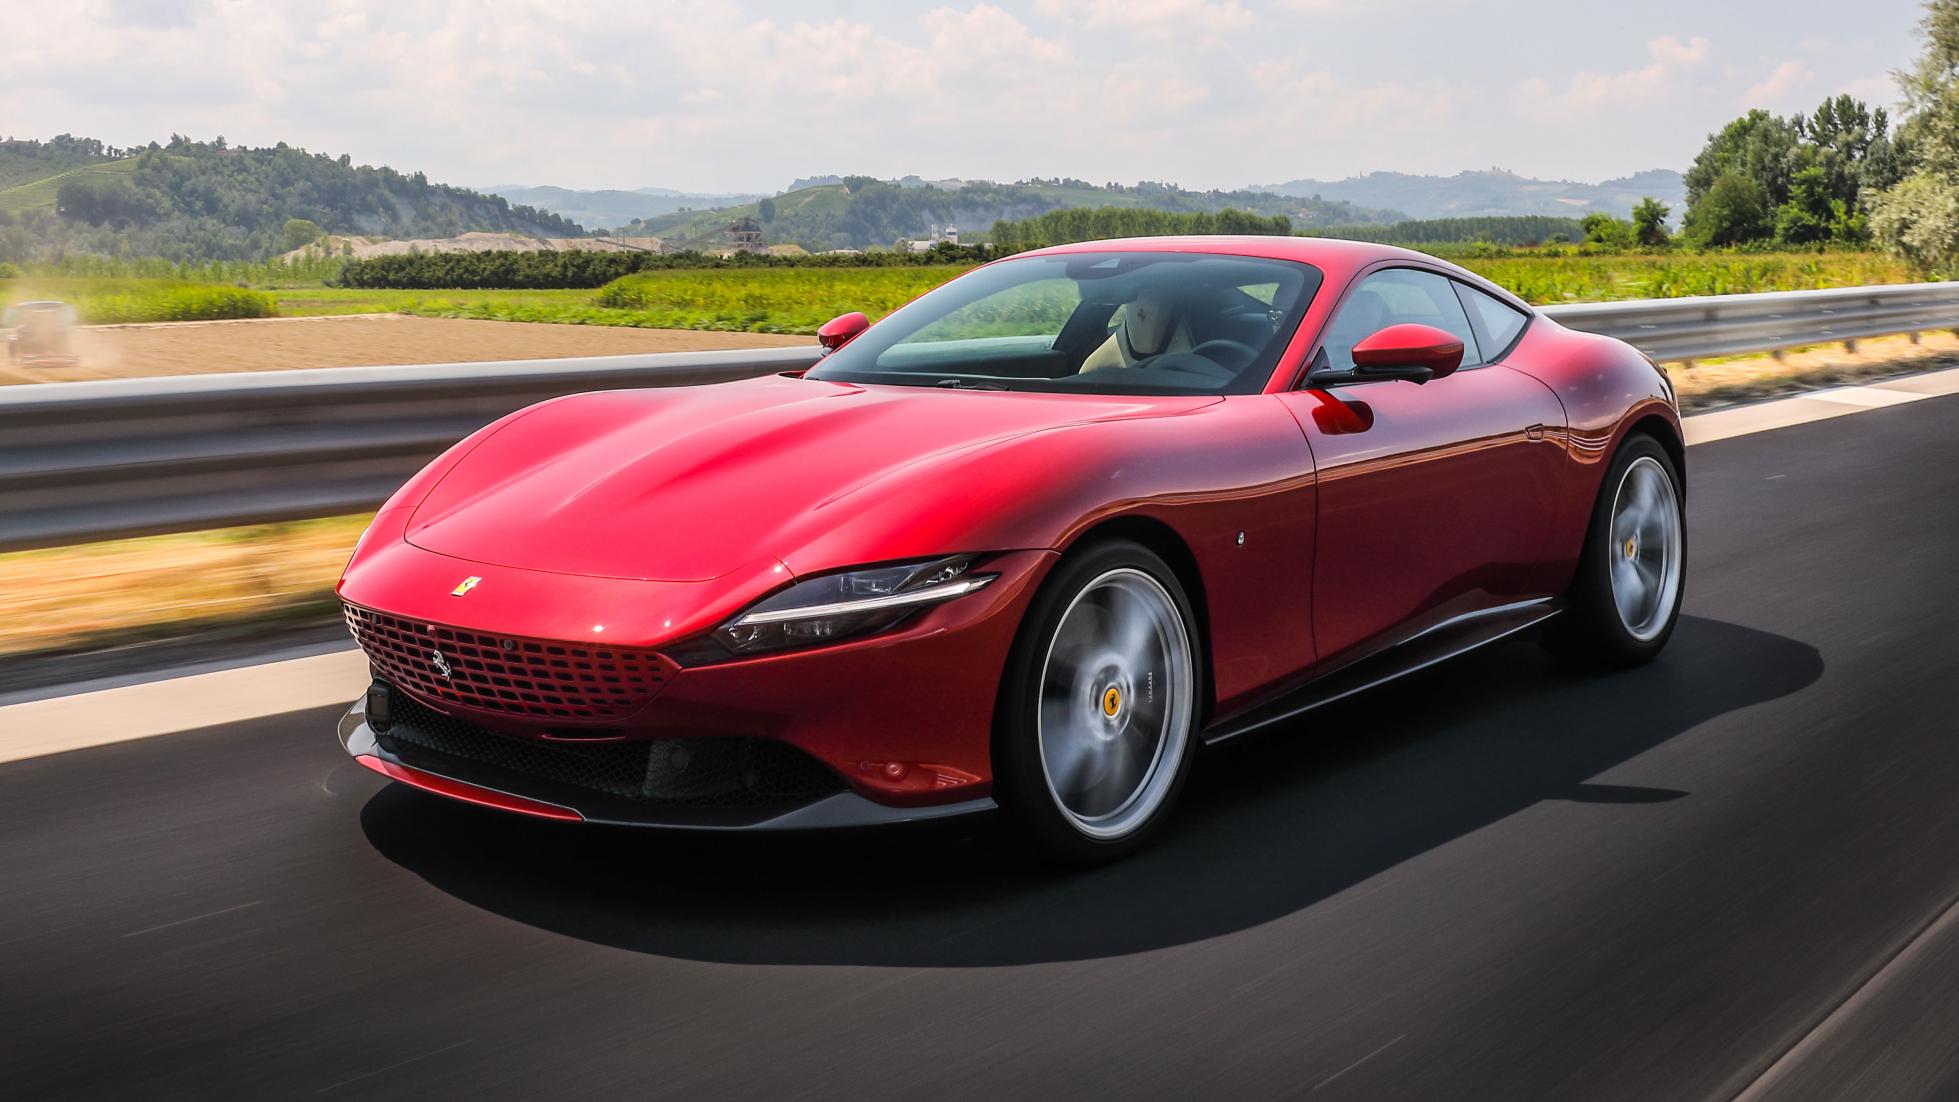 Ferrari Roma review: Aston DB11 and AMG GT rival tested By topgear, 04 August 2020	